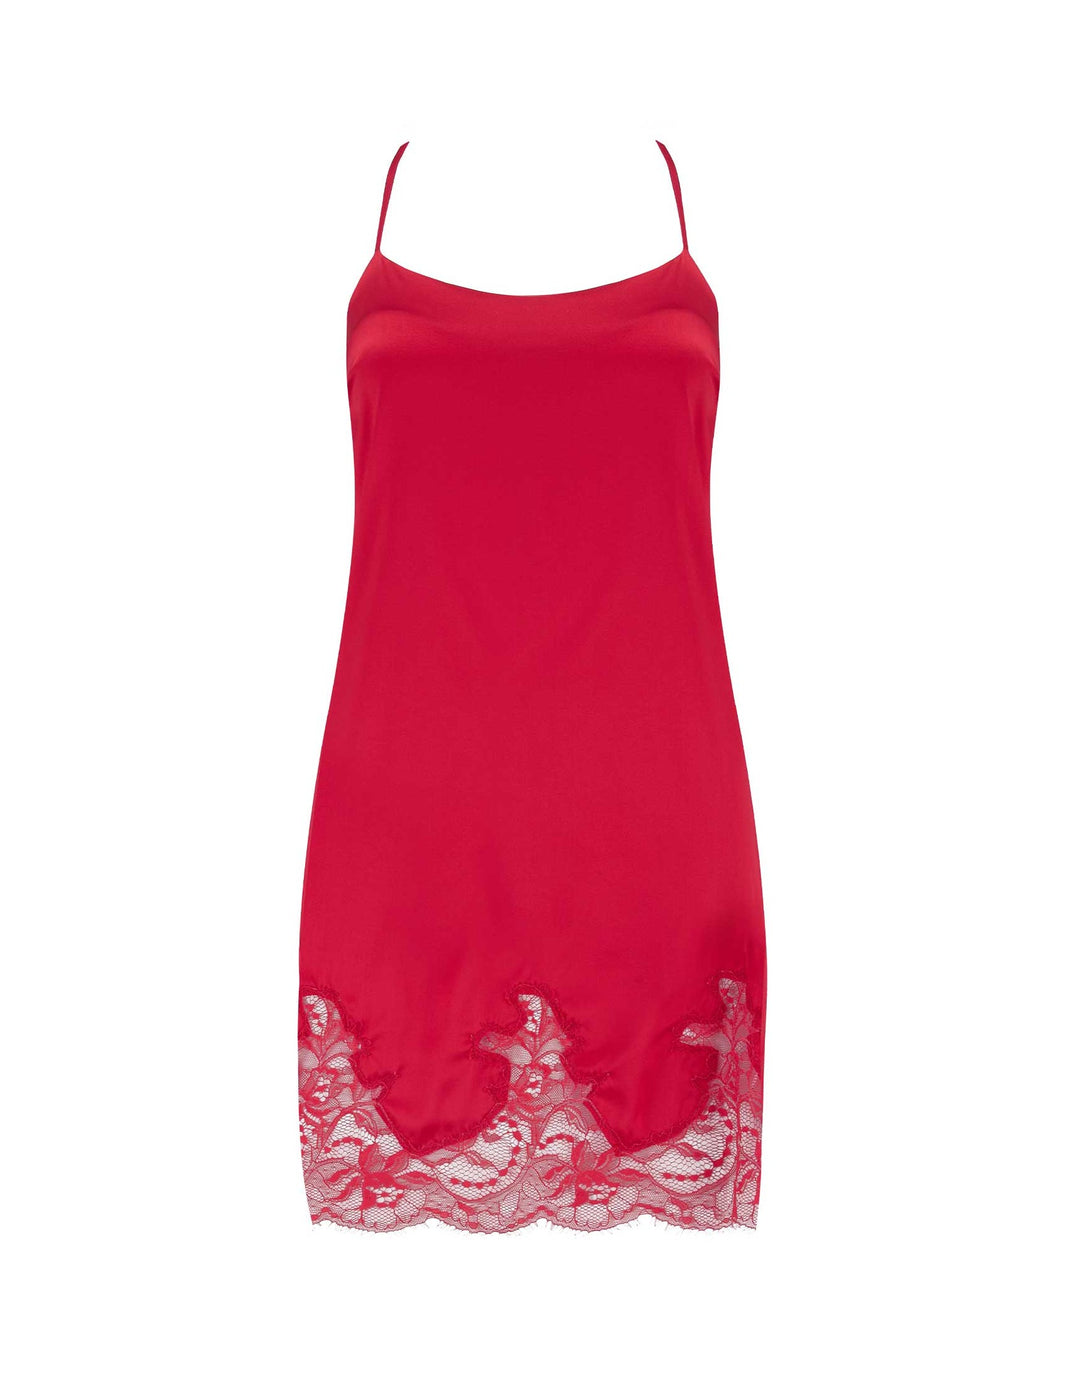 Fleur of England Adeline Red Silk & Lace Babydoll Chemise